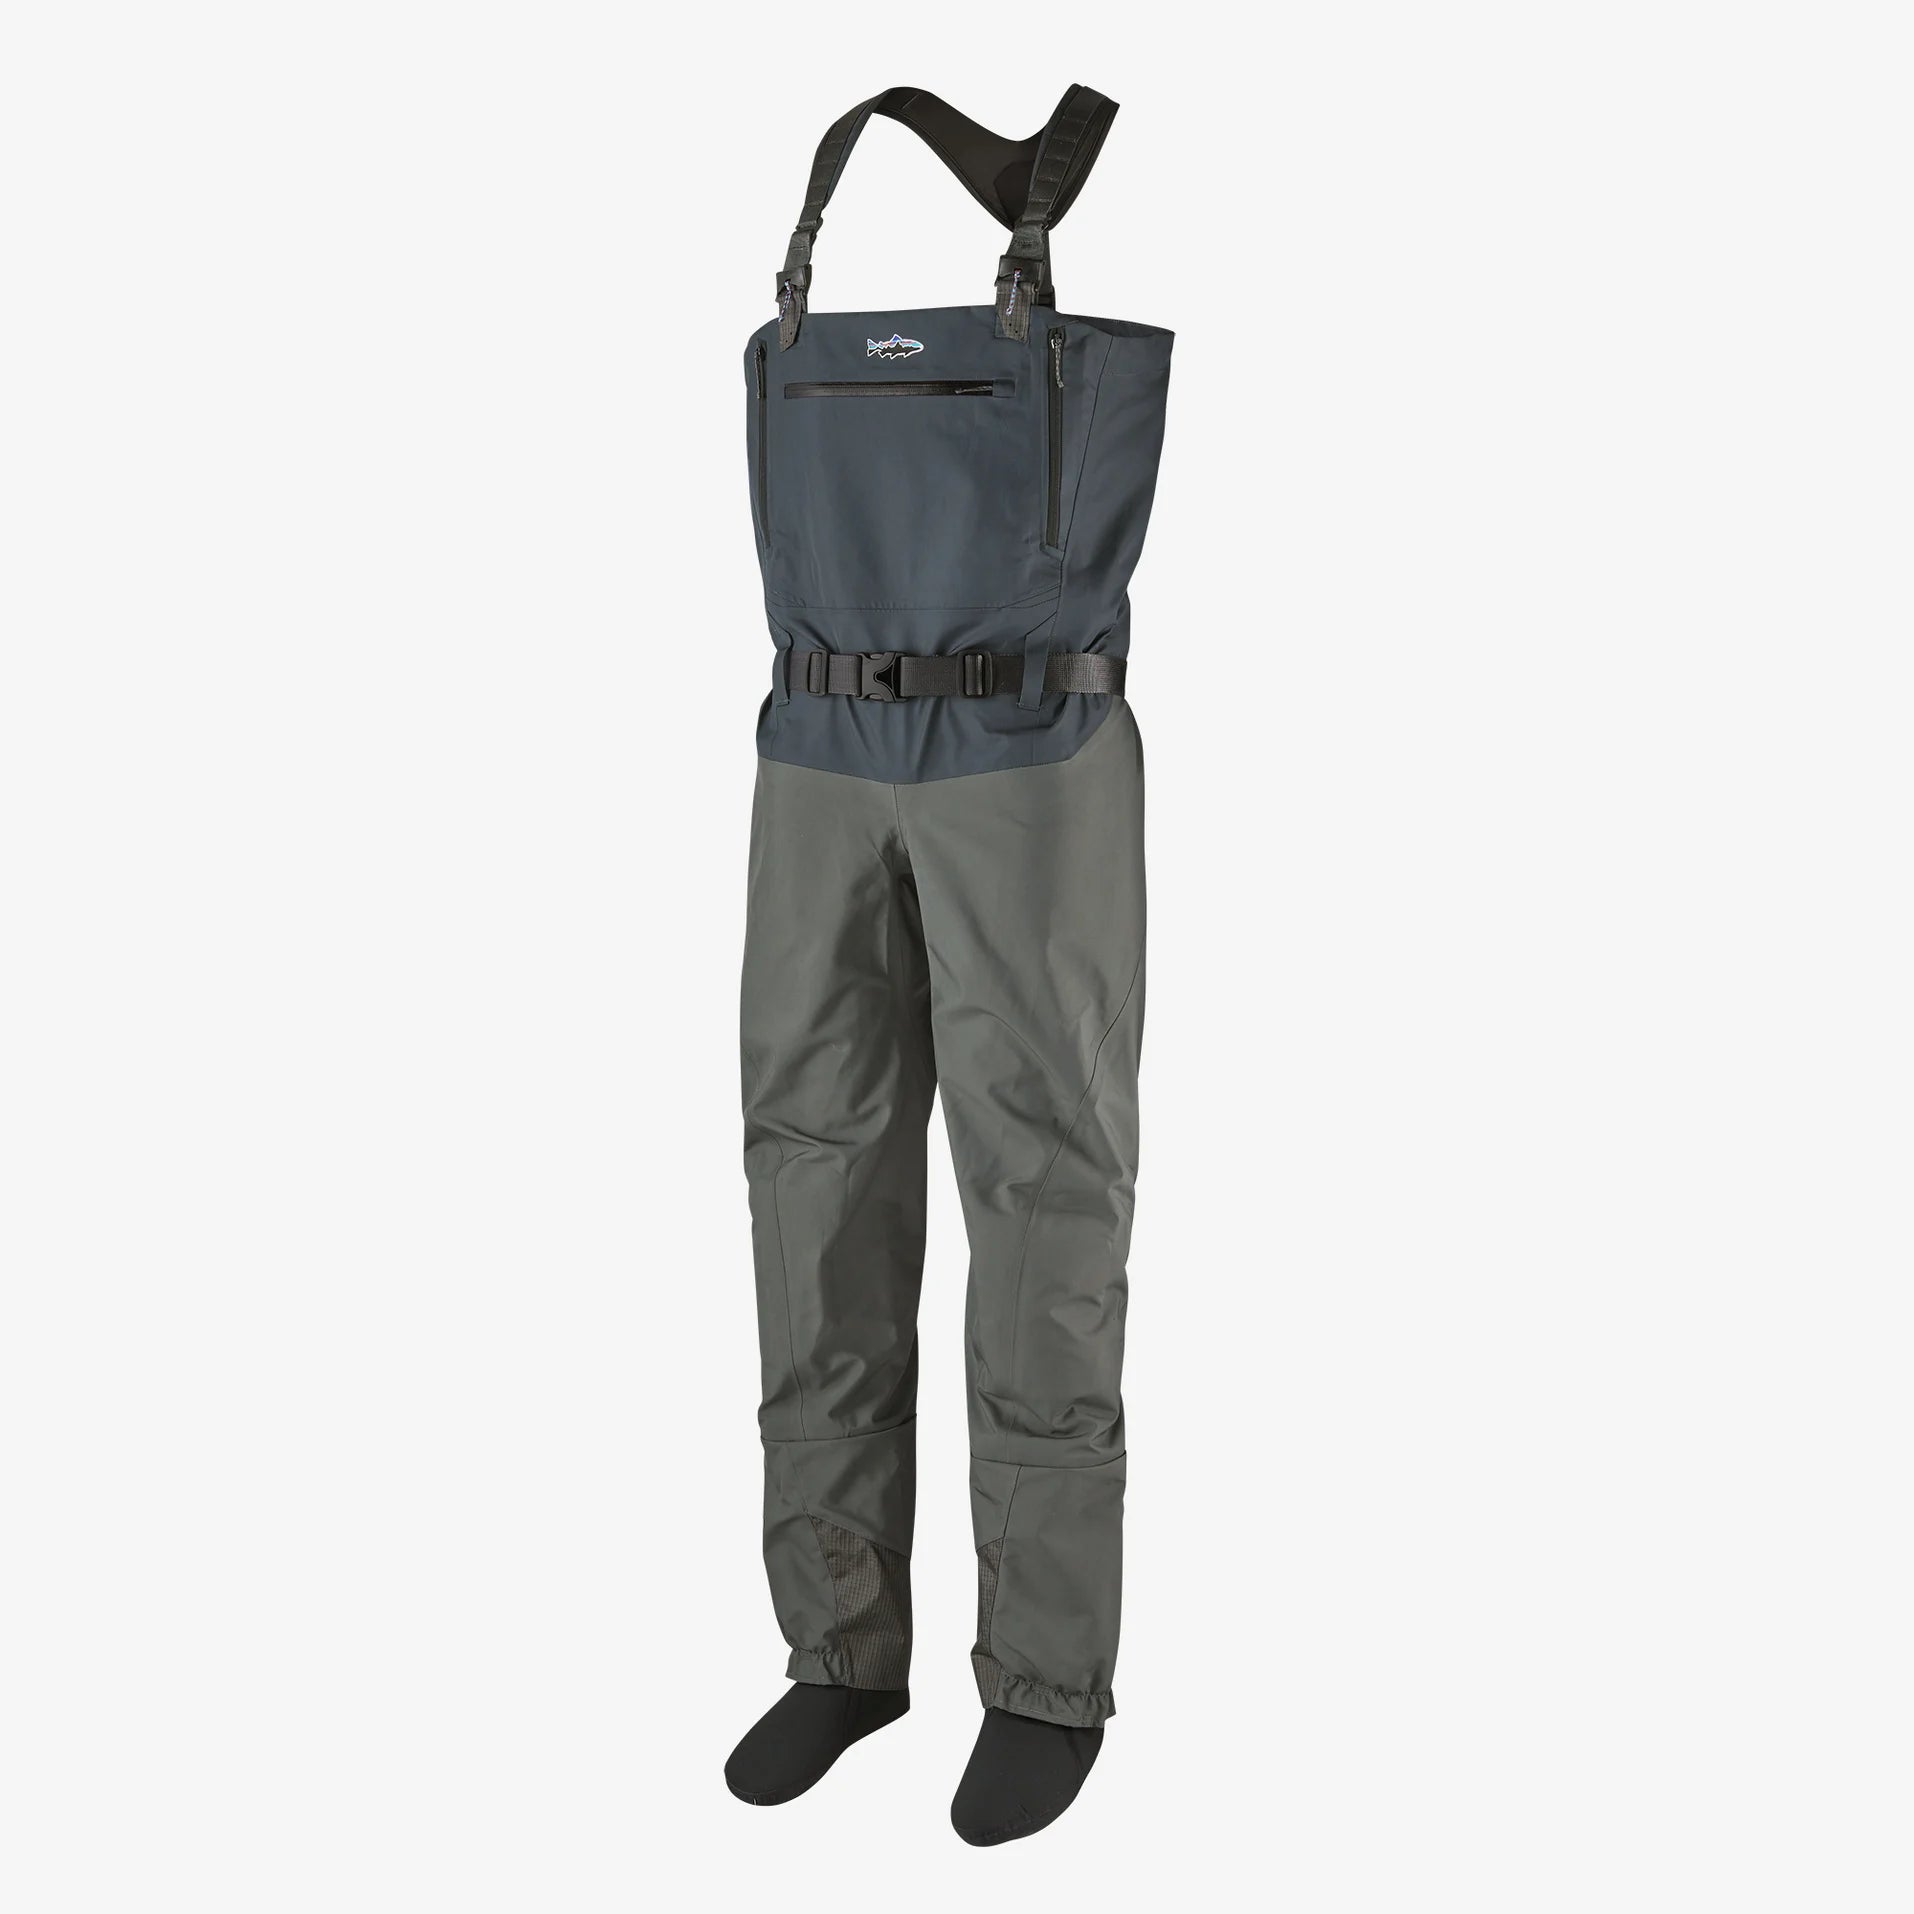 Patagonia M's Swiftcurrent Expedition Waders